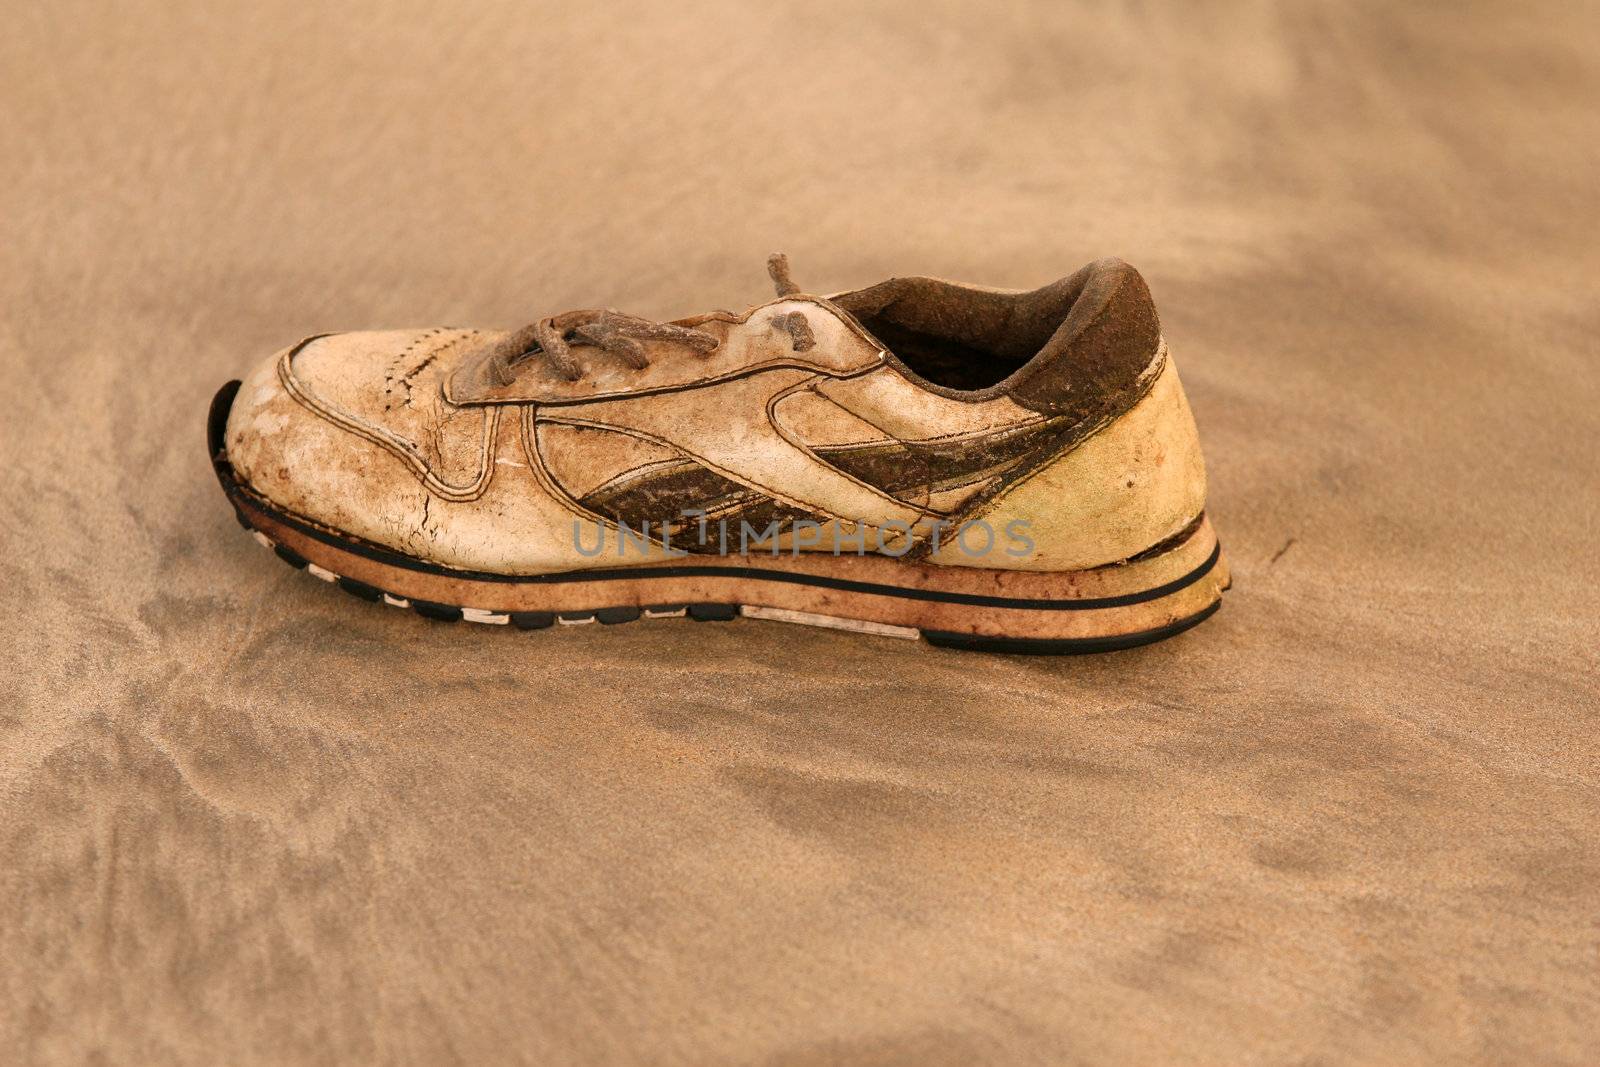 old and dirty running shoe on the beach